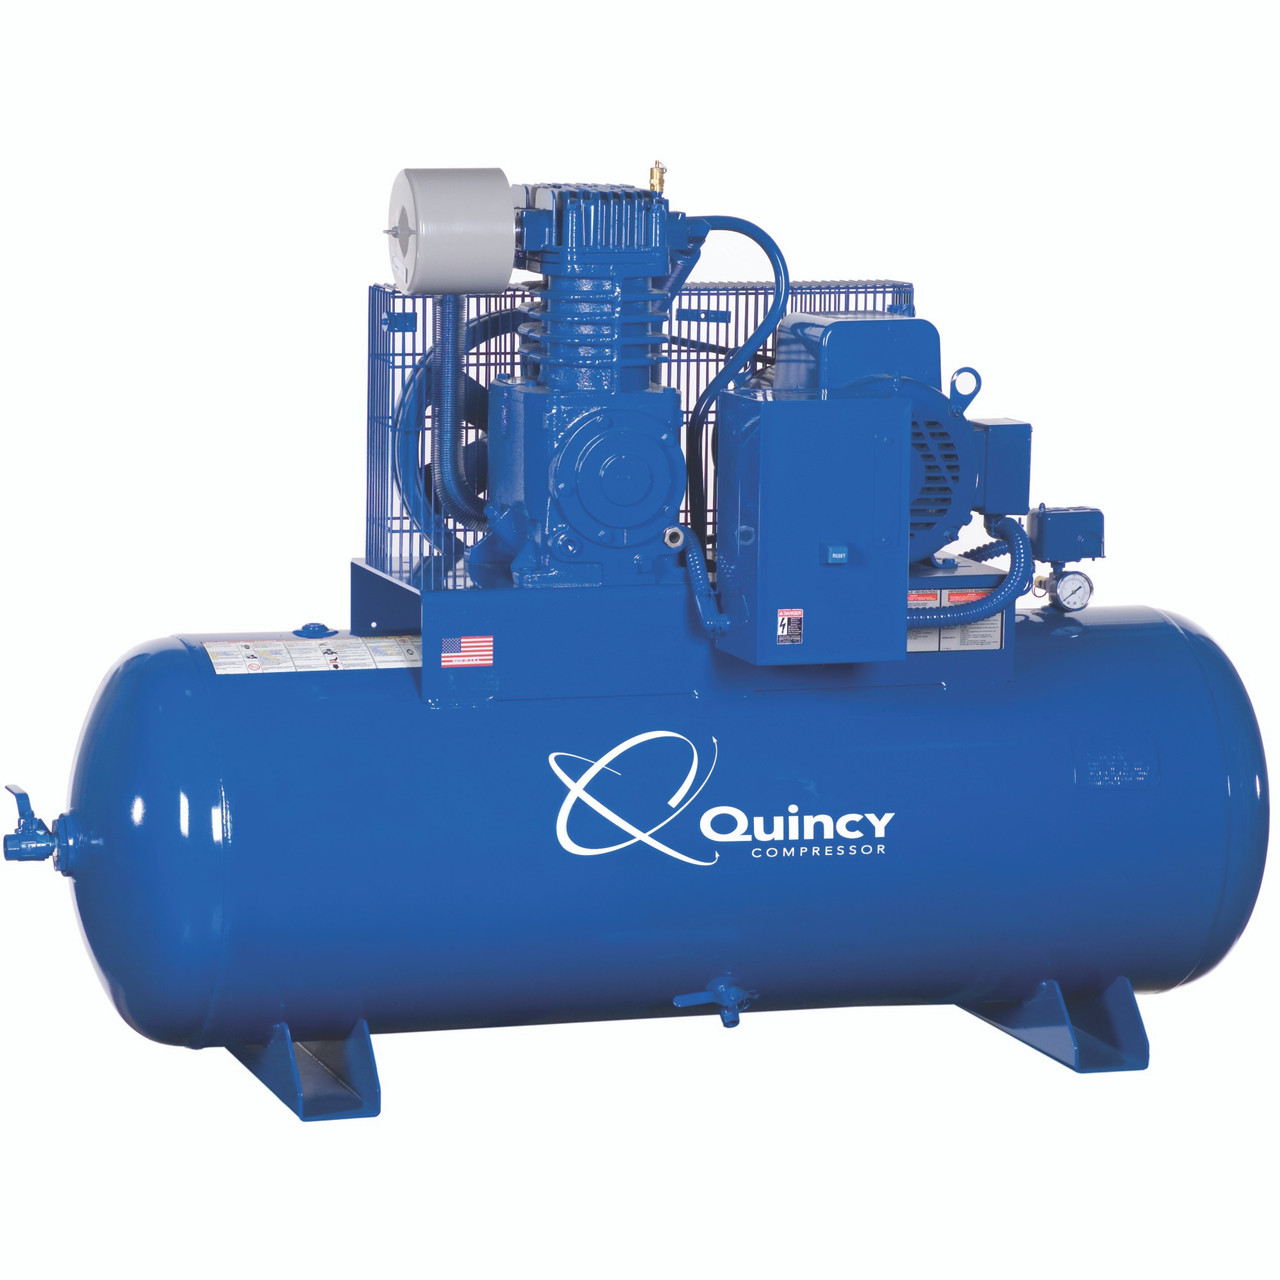 Quincy QP 373DS80HCA20 7.5 HP PRO, 200 Volt Three Phase, Two Stage, 80 Gallon Horizontal Air Compressor